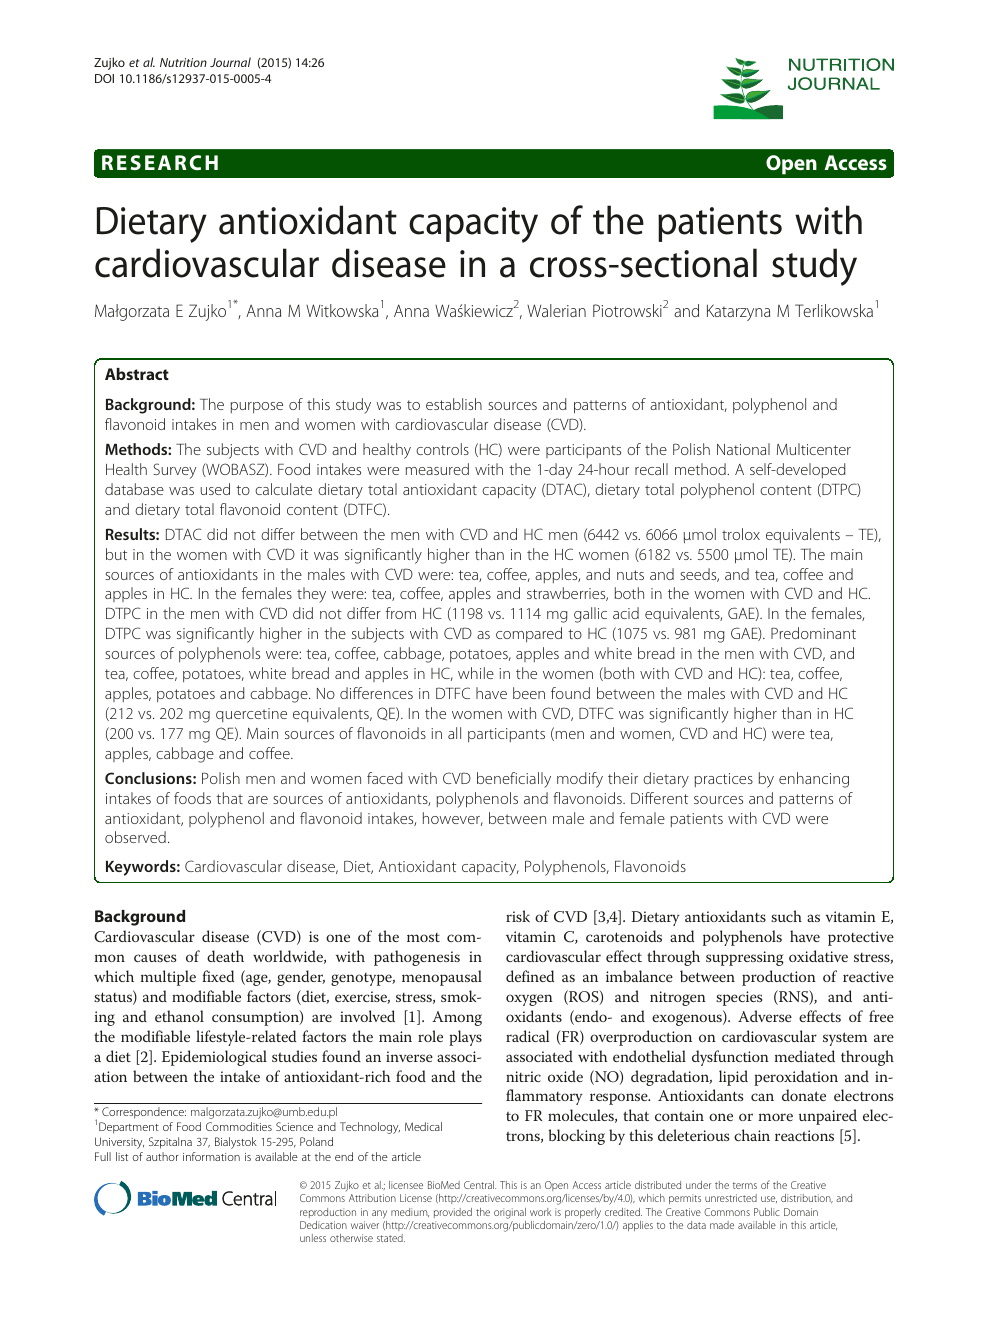 Dietary Antioxidant Capacity Of The Patients With Cardiovascular Disease In A Cross Sectional Study Topic Of Research Paper In Health Sciences Download Scholarly Article Pdf And Read For Free On Cyberleninka Open